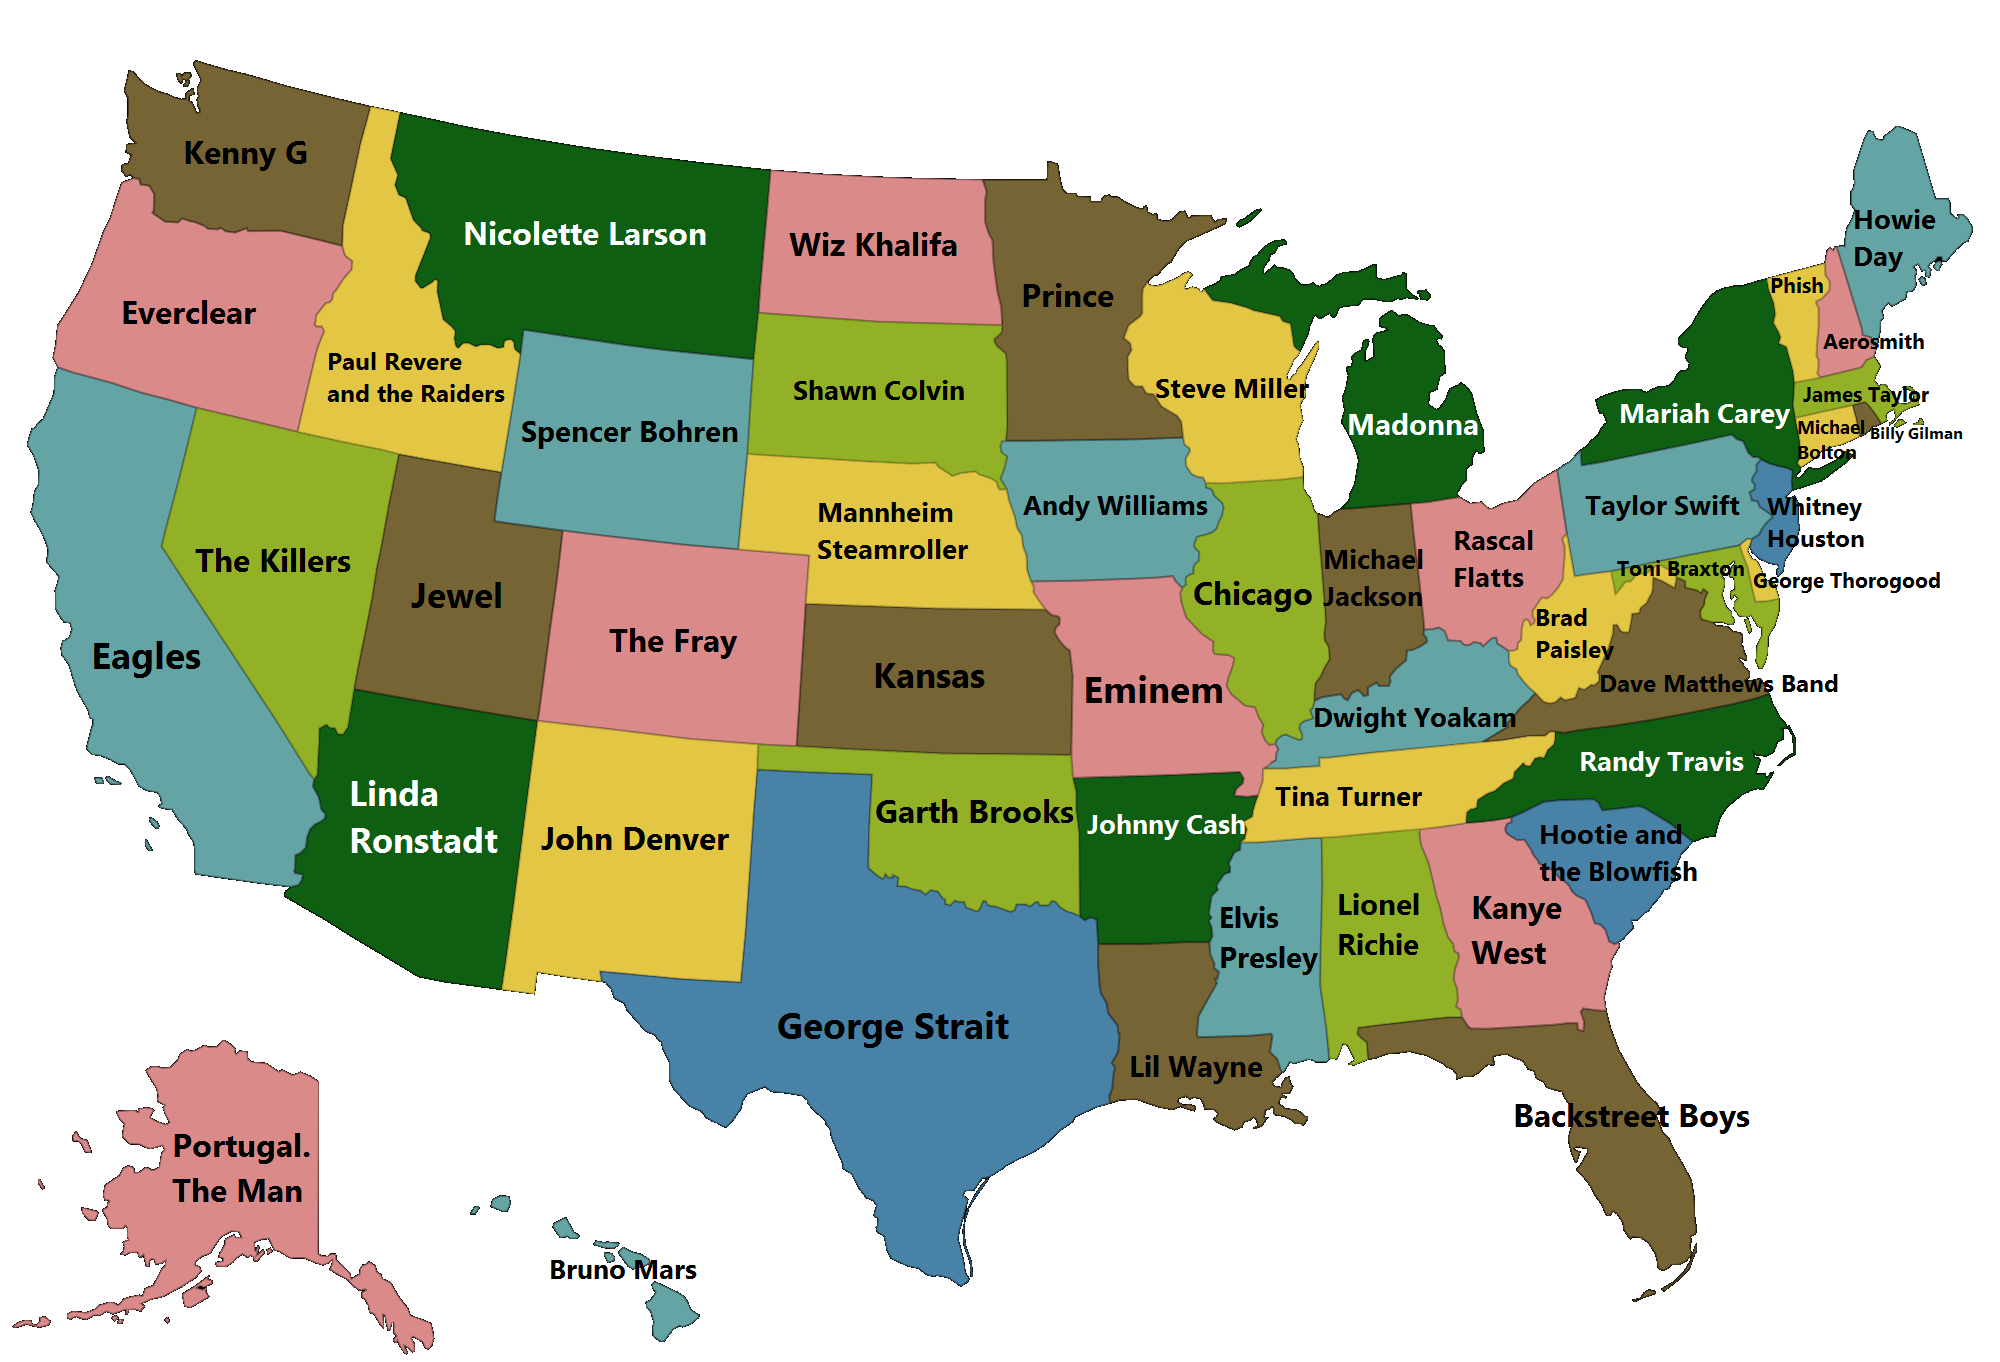 Best selling music artists from each US state